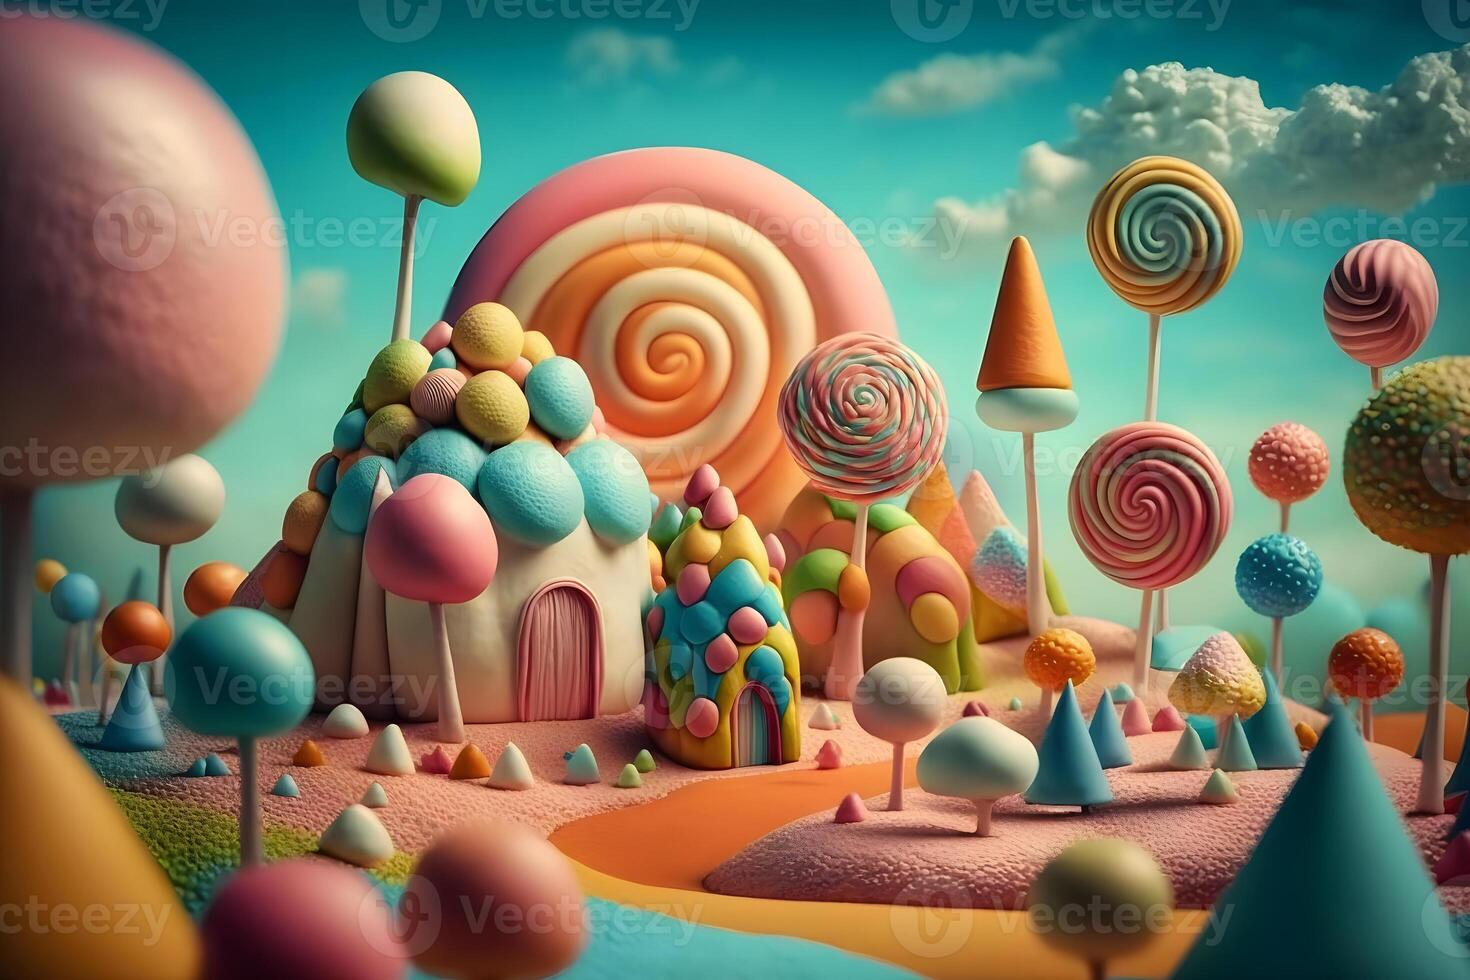 Fantasy sweet candy land. Neural network photo